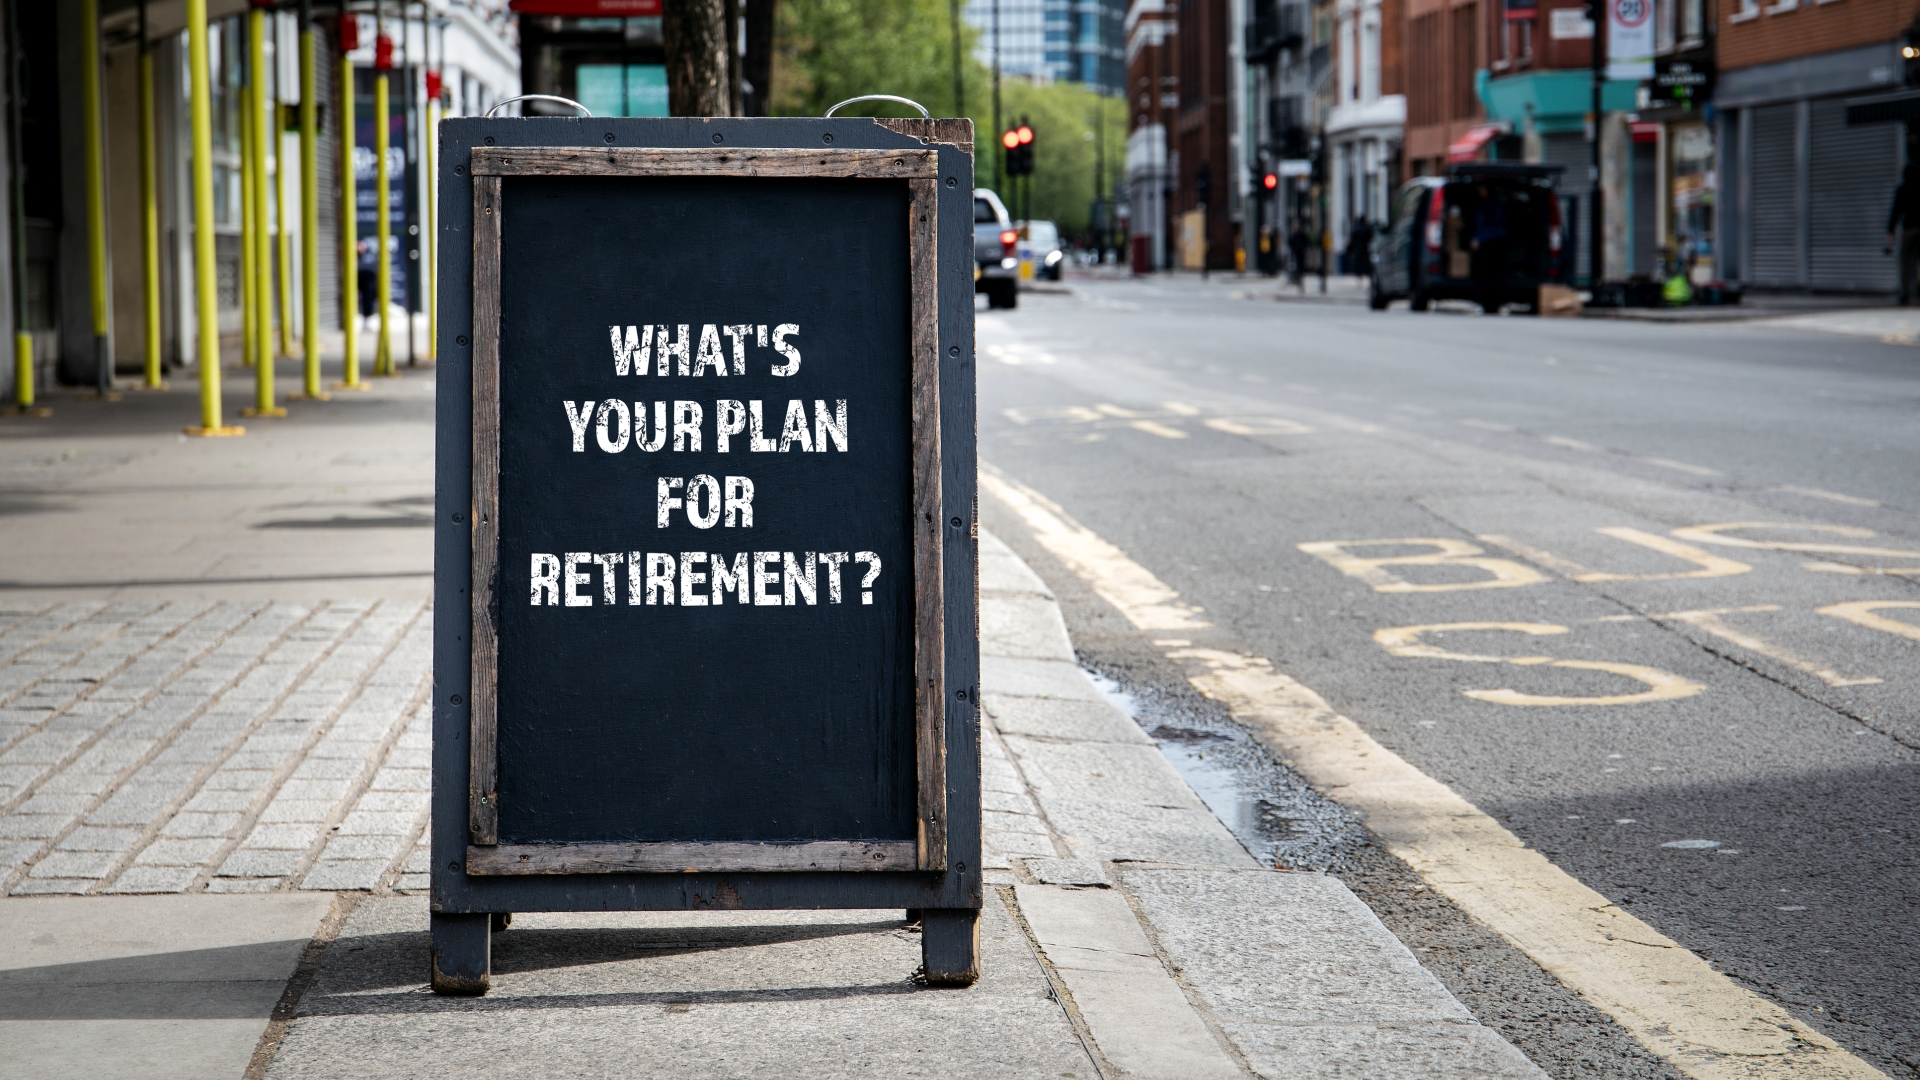 how to, 401(k) alternatives: how to save for retirement without a 401(k)